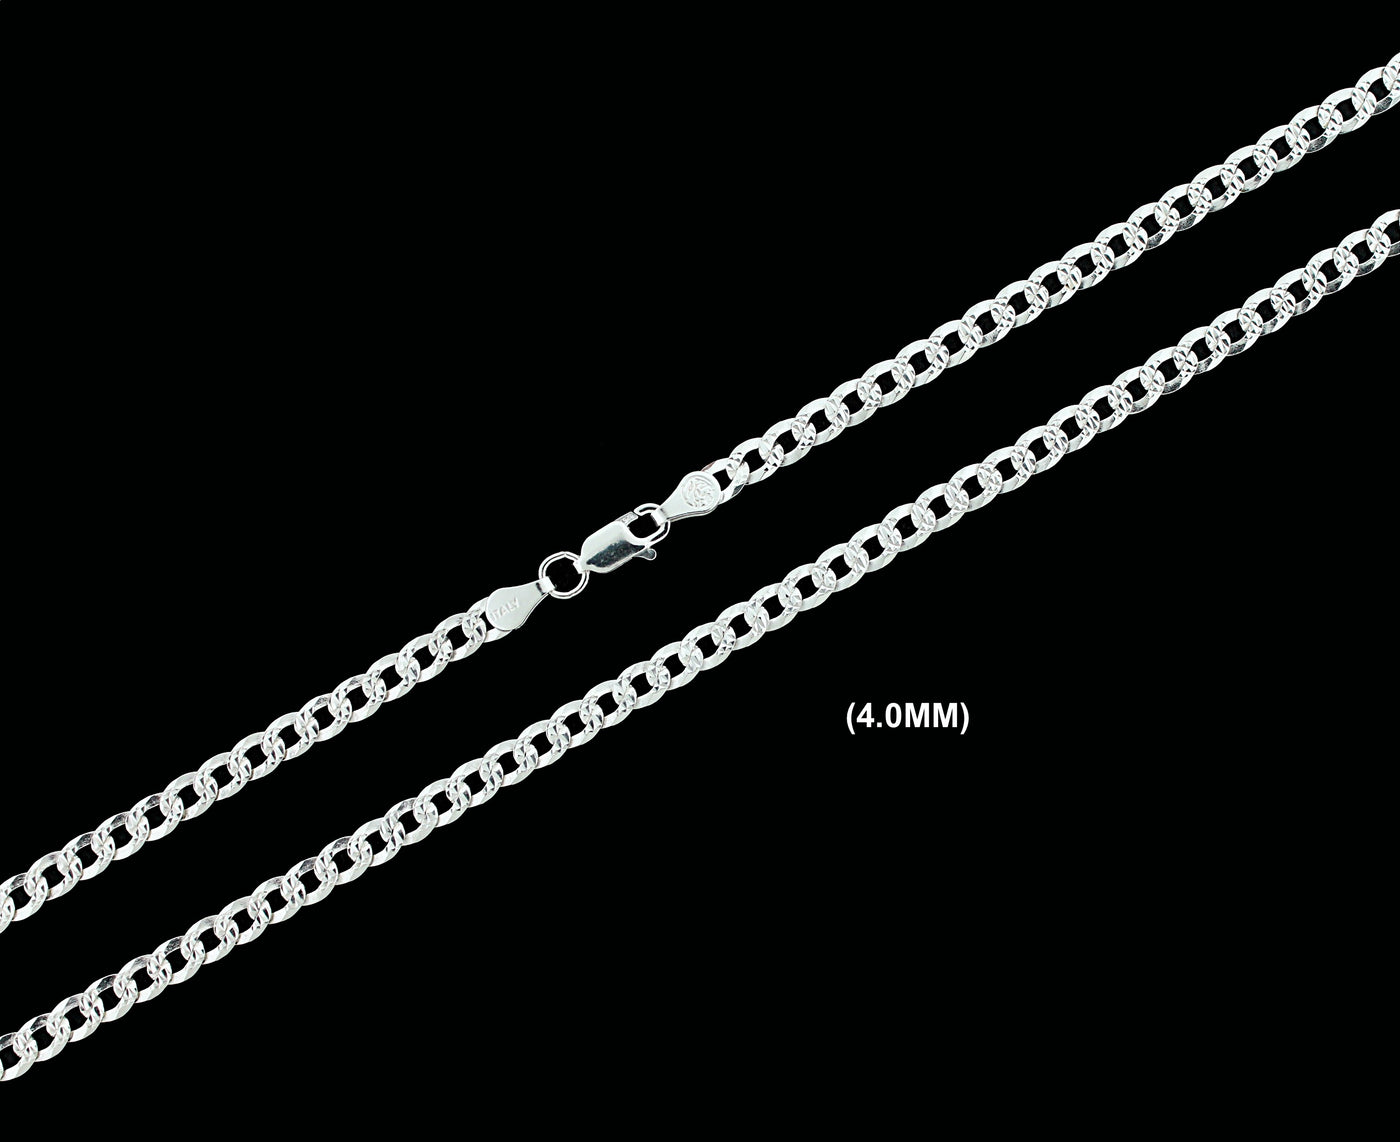 4MM Solid 925 Sterling Silver Diamond Cut Cuban Curb Chain Necklace or Bracelet ITALY